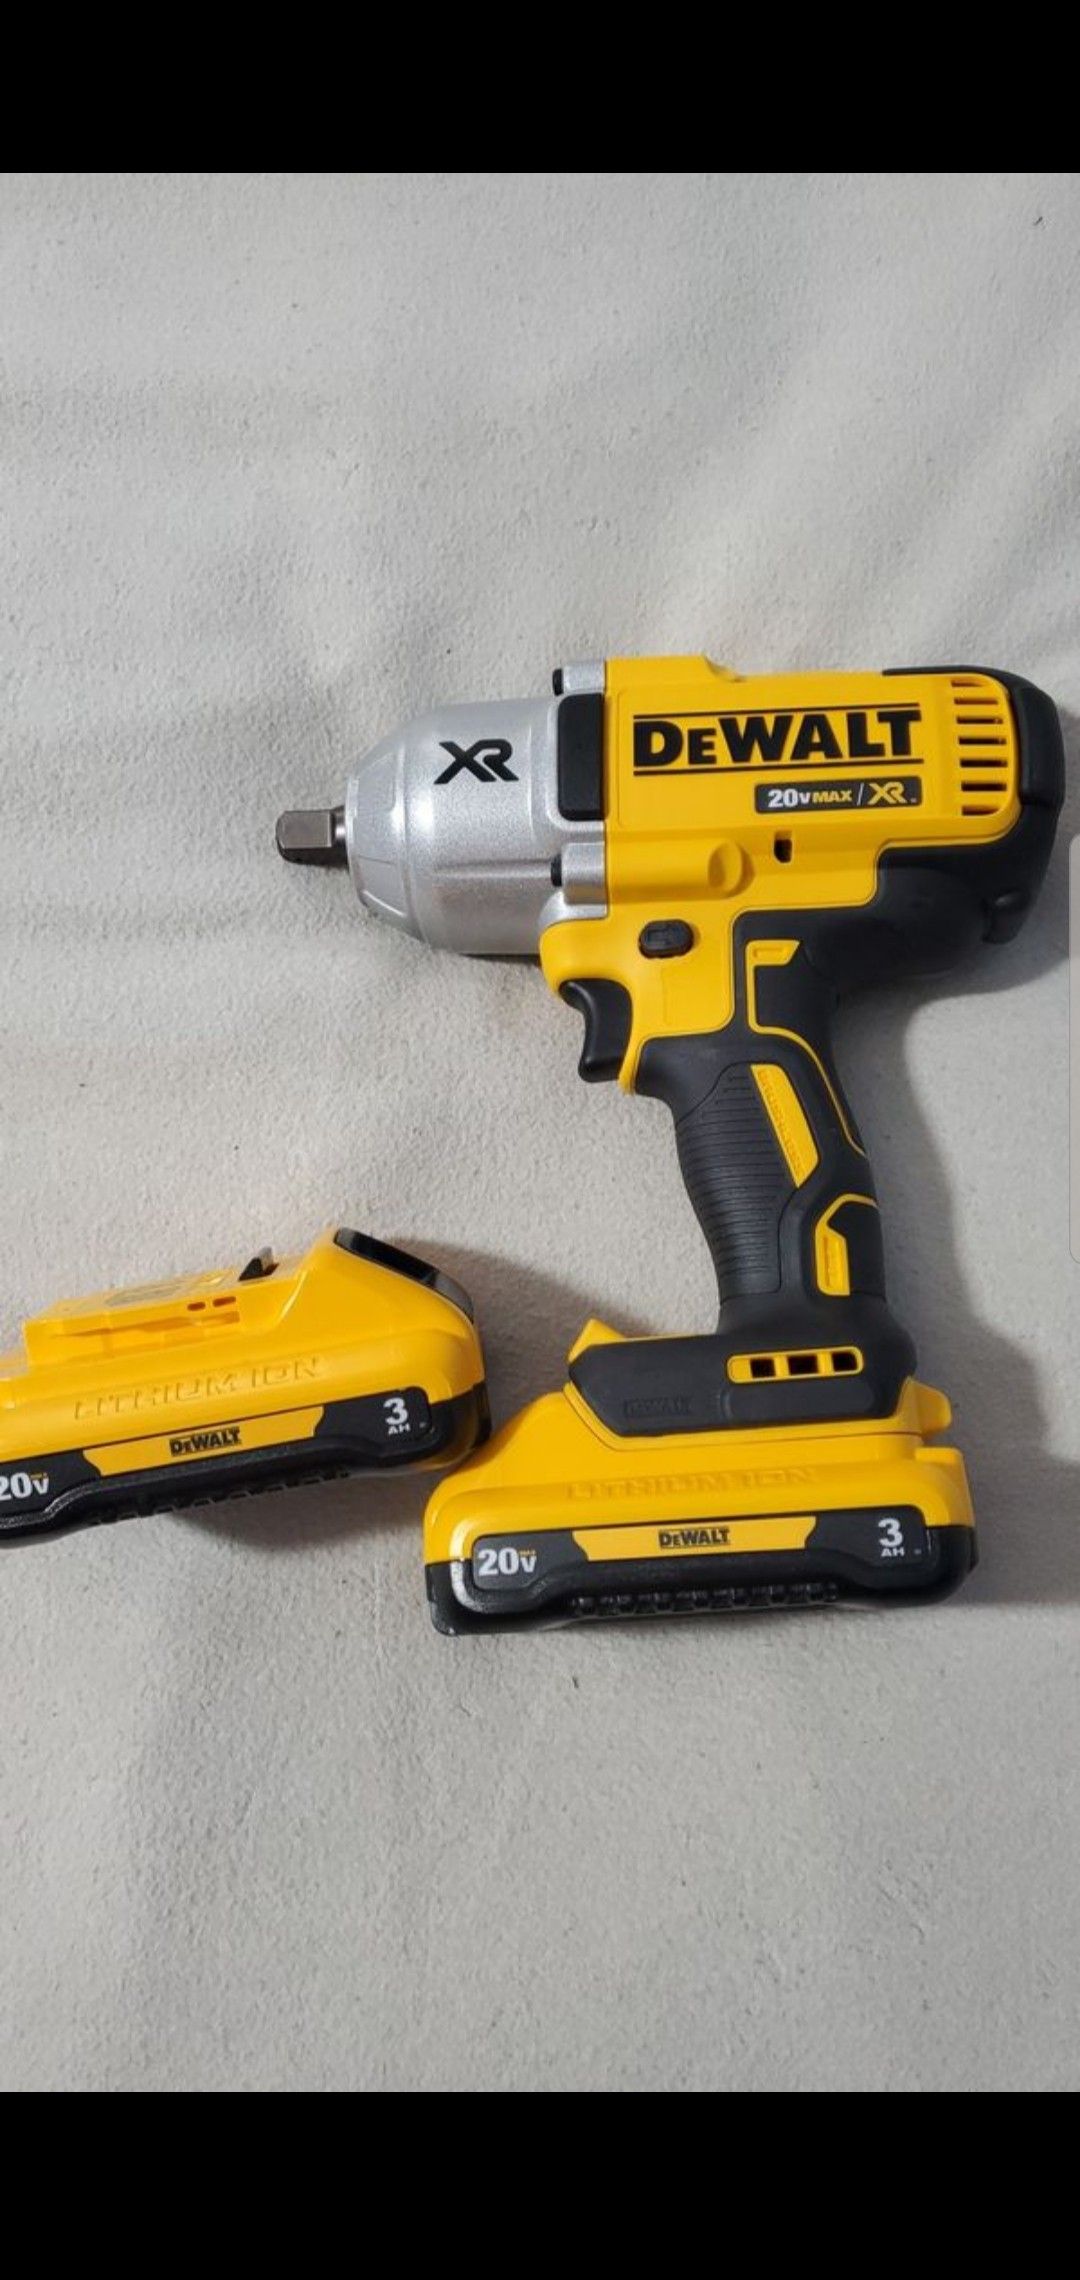 Dewalt 20V Max XR Brushless 1/2in High Torque Impact Wrench with 2 new 3ah batteries. ALL NEW. PRICE FIRM